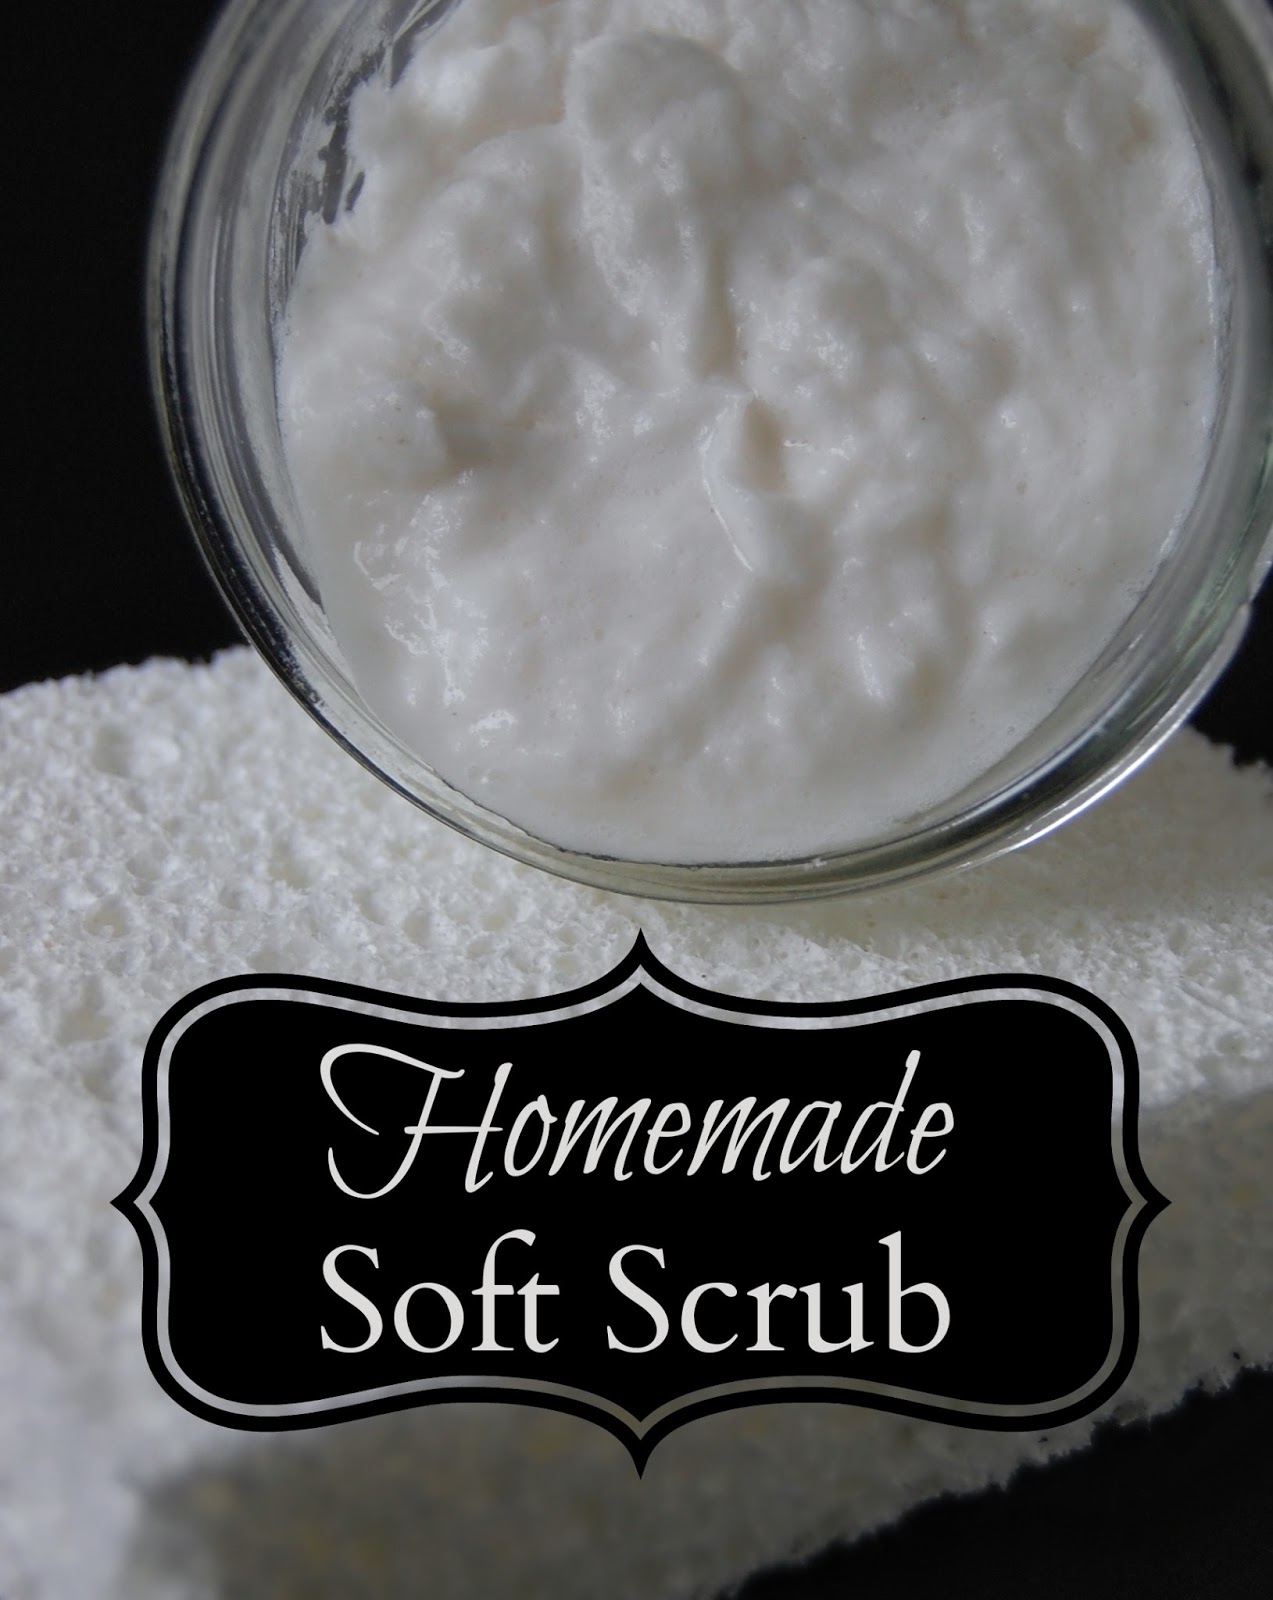 Homemade Soft Scrub - make your very own soft scrub at home! More often than not, I just sprinkle baking soda in my sink or tub and scrub that way. However, when you want a nice soft scrub consistency it's really not much more effort to make your own! #softscrub #naturalcleaning #greencleaning #bakingsoda #cleaning